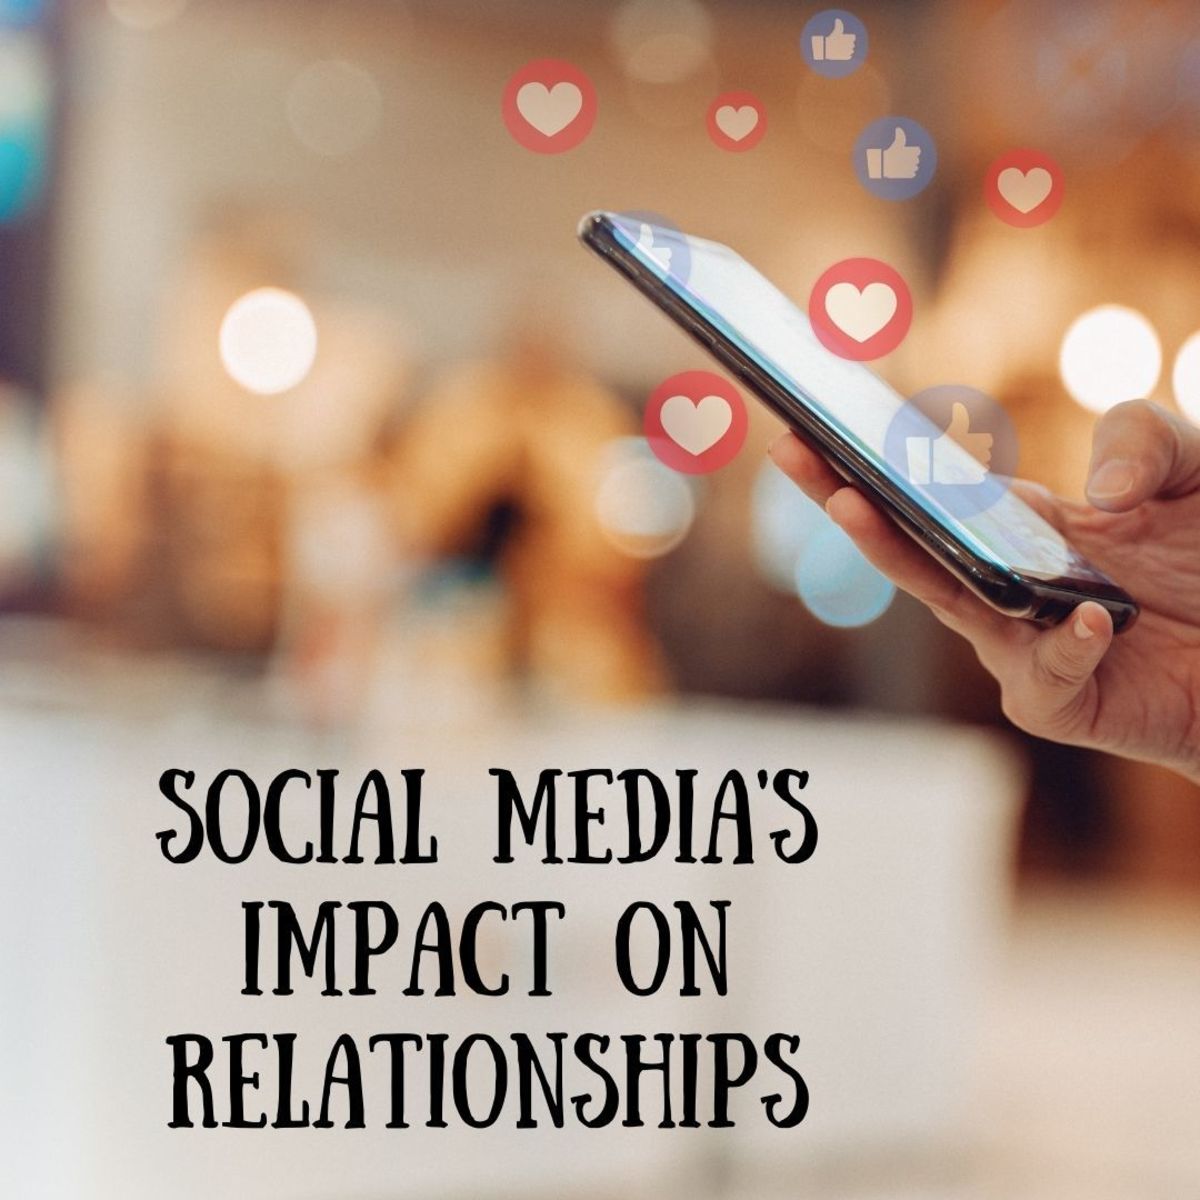 What sort of effect does social media have on relationships?